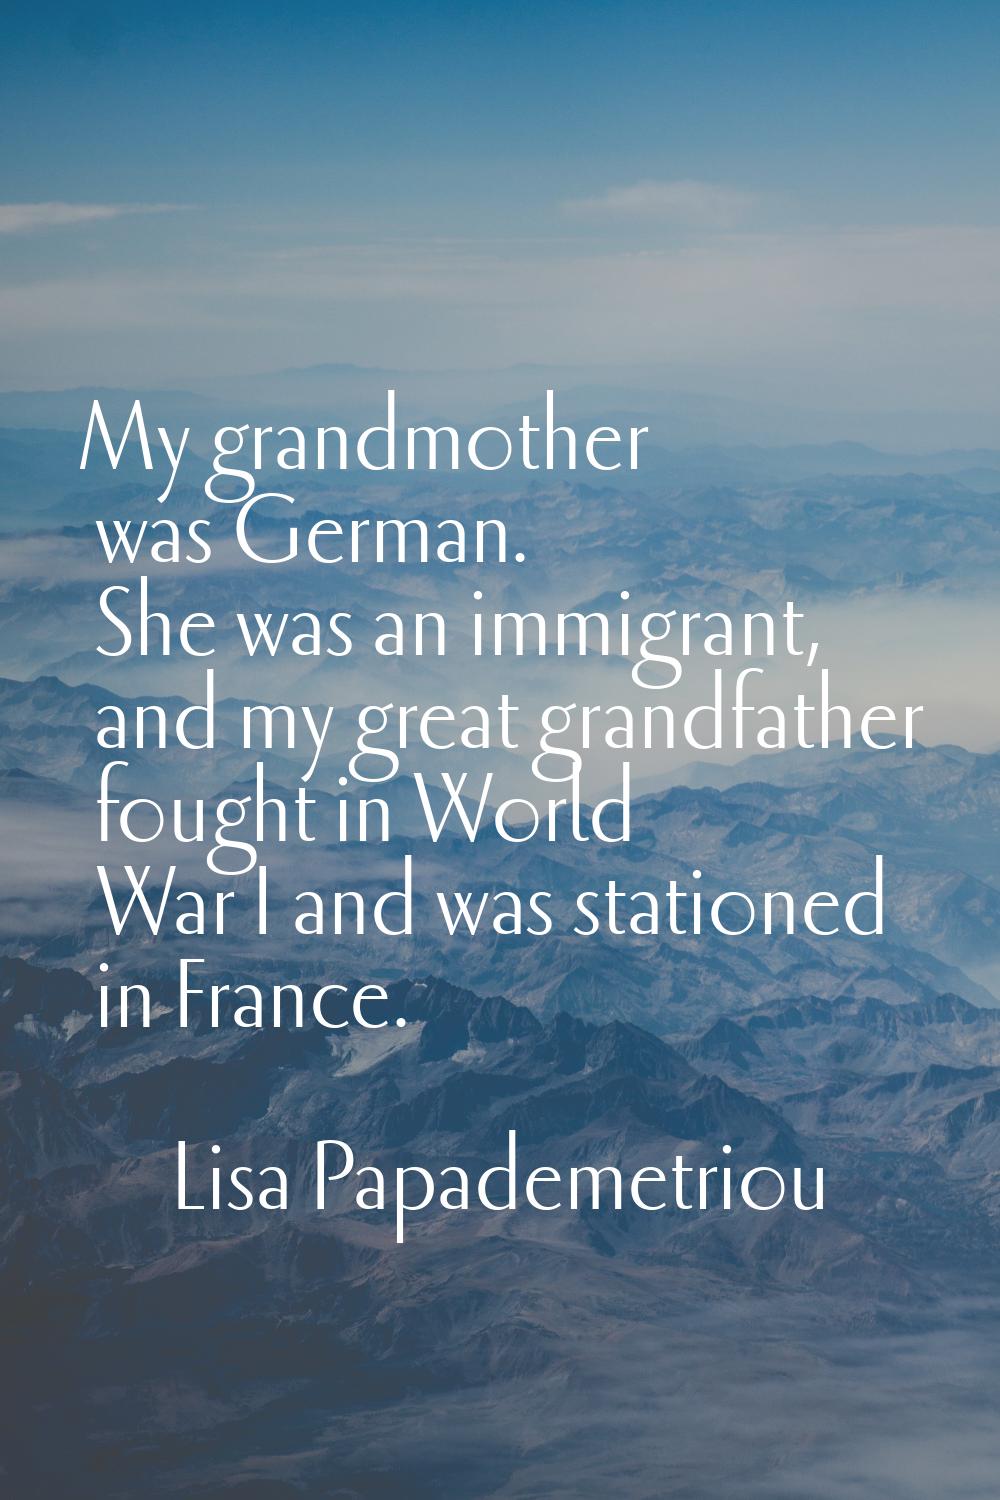 My grandmother was German. She was an immigrant, and my great grandfather fought in World War I and